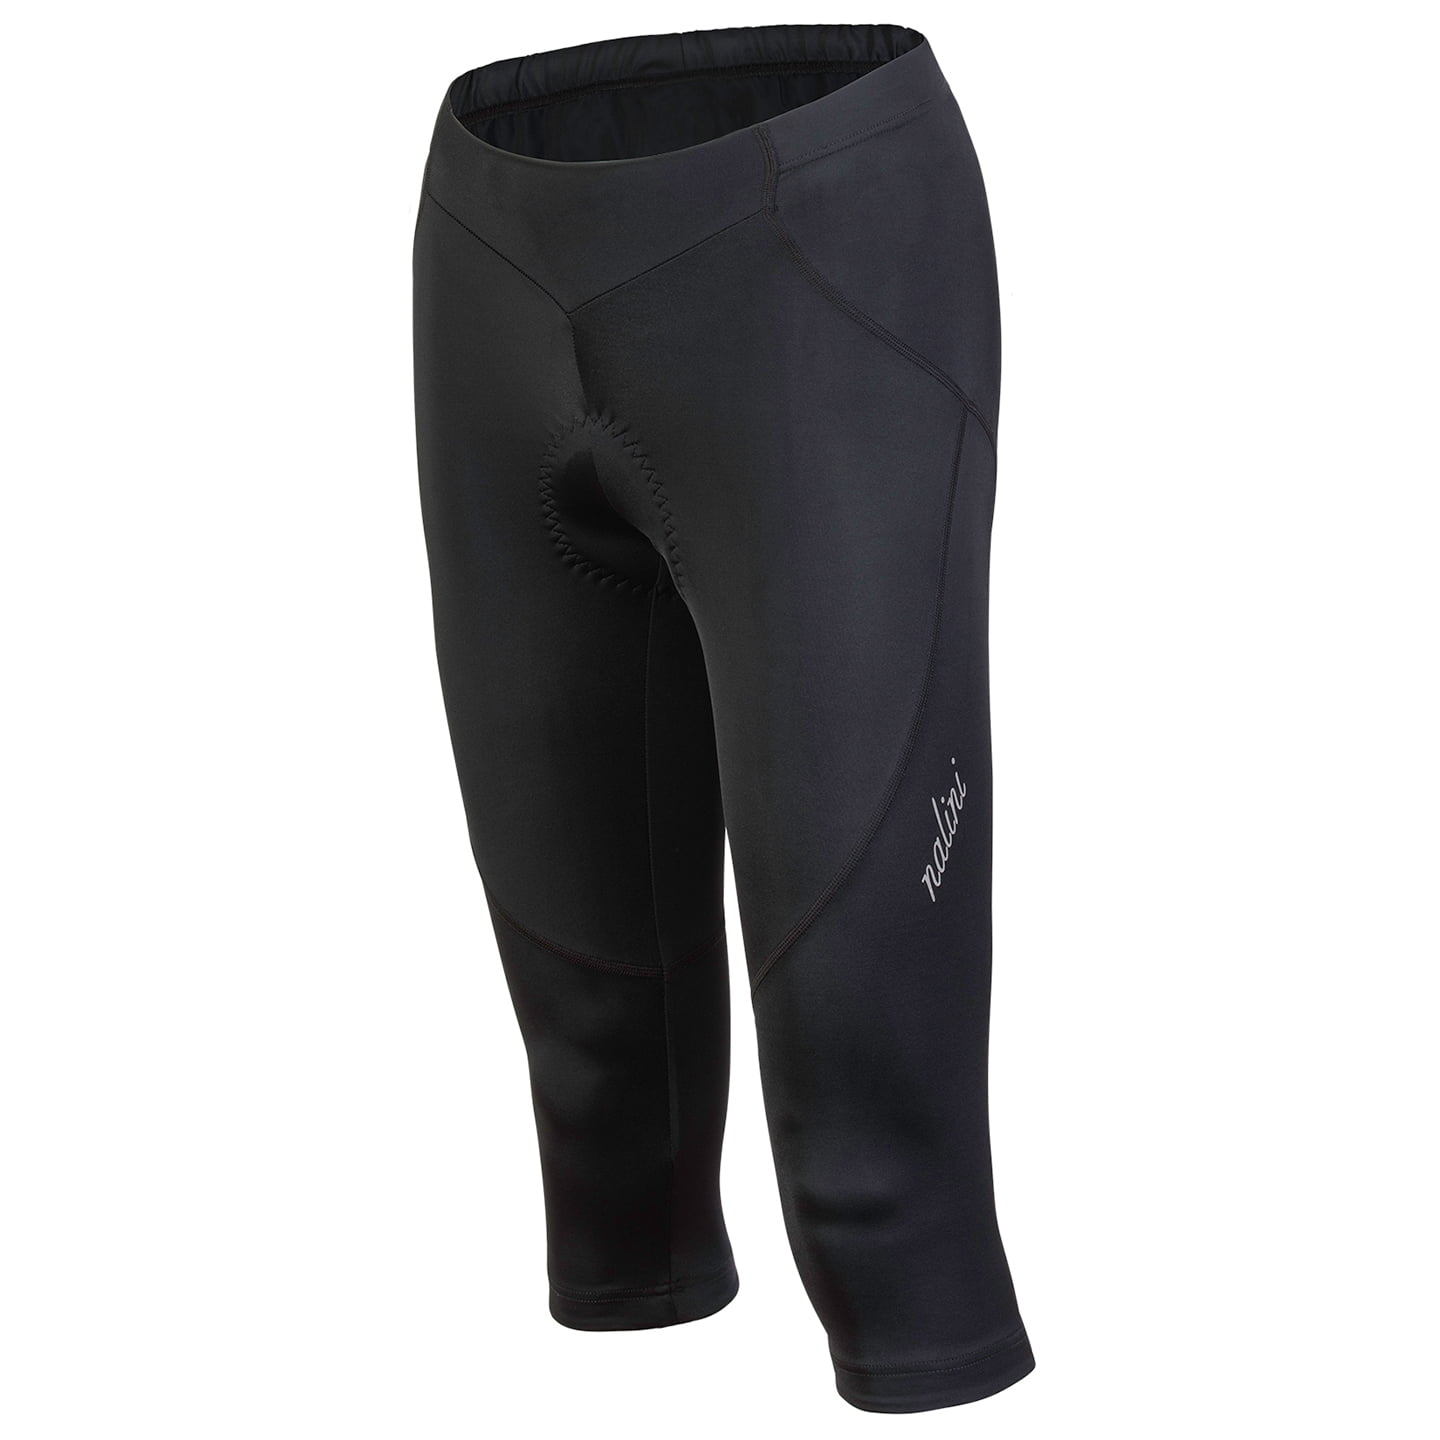 NALINI Women’s Knickers Pure, size S, Cycle trousers, Cycle clothing